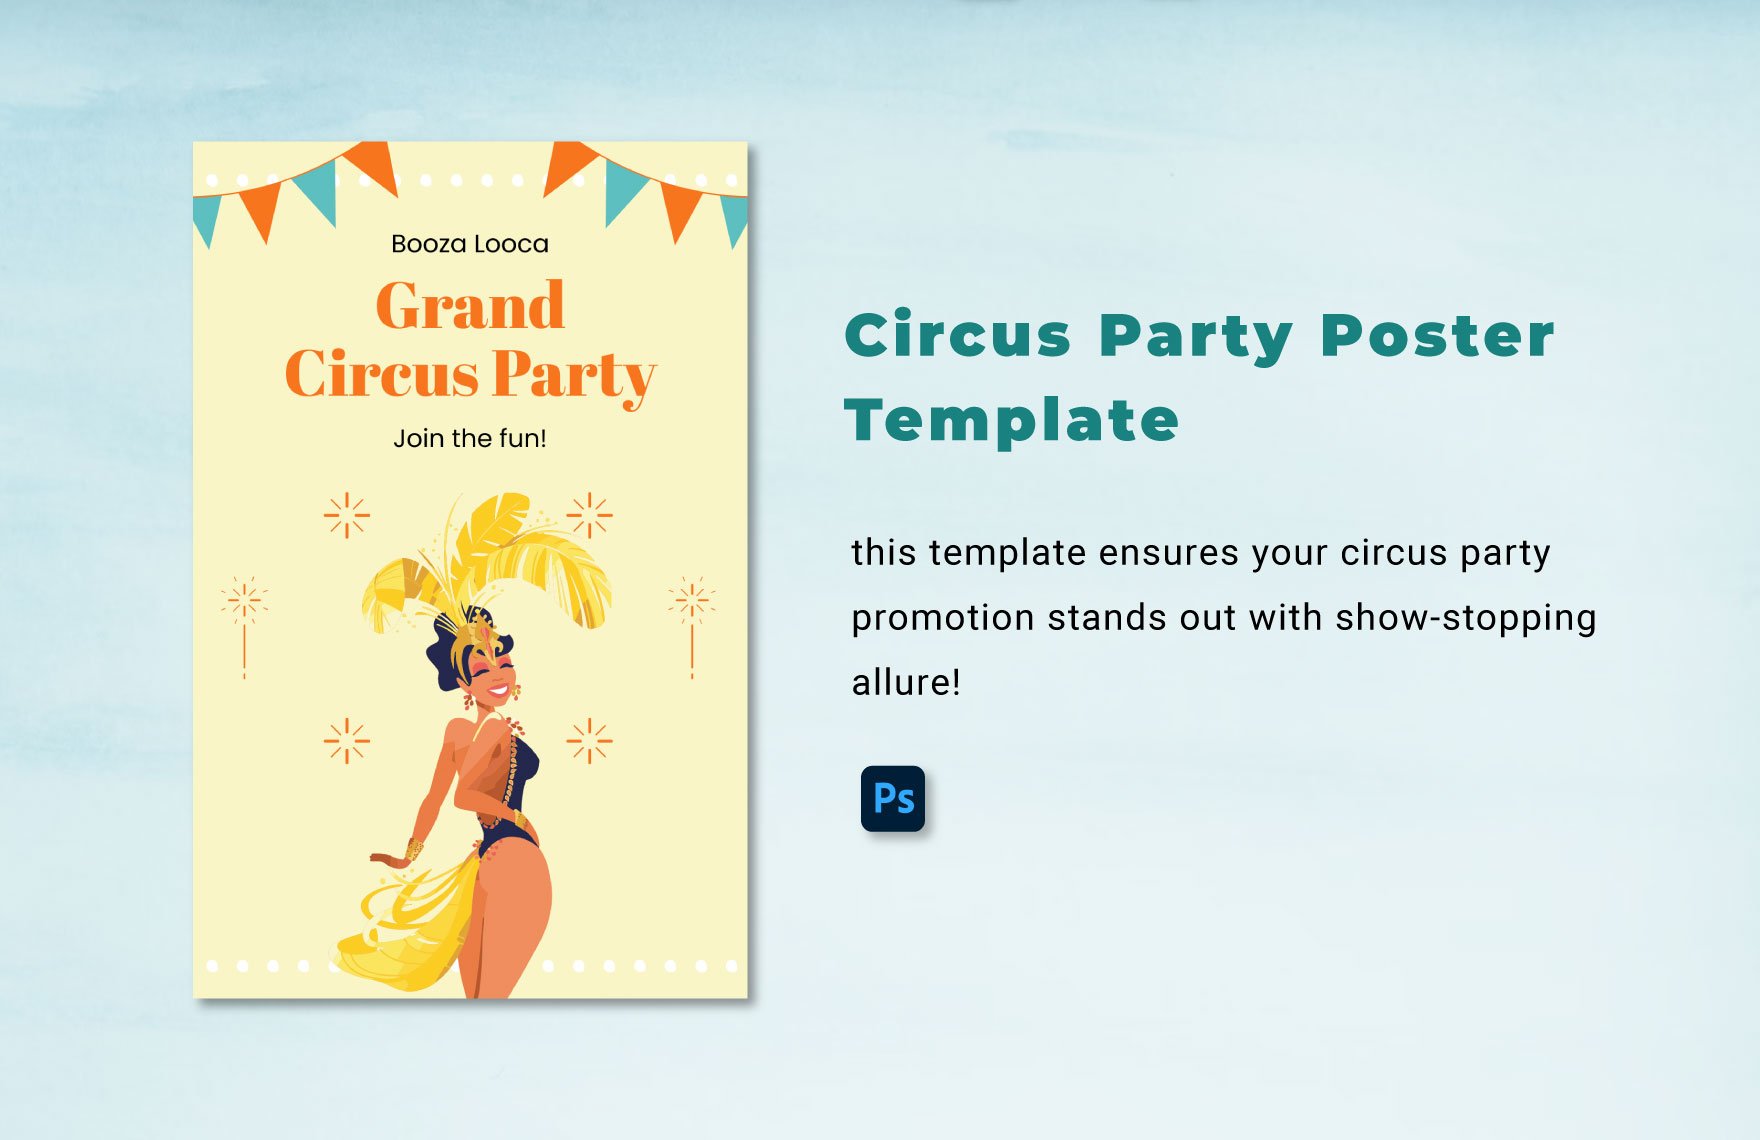 Circus Party Poster Template